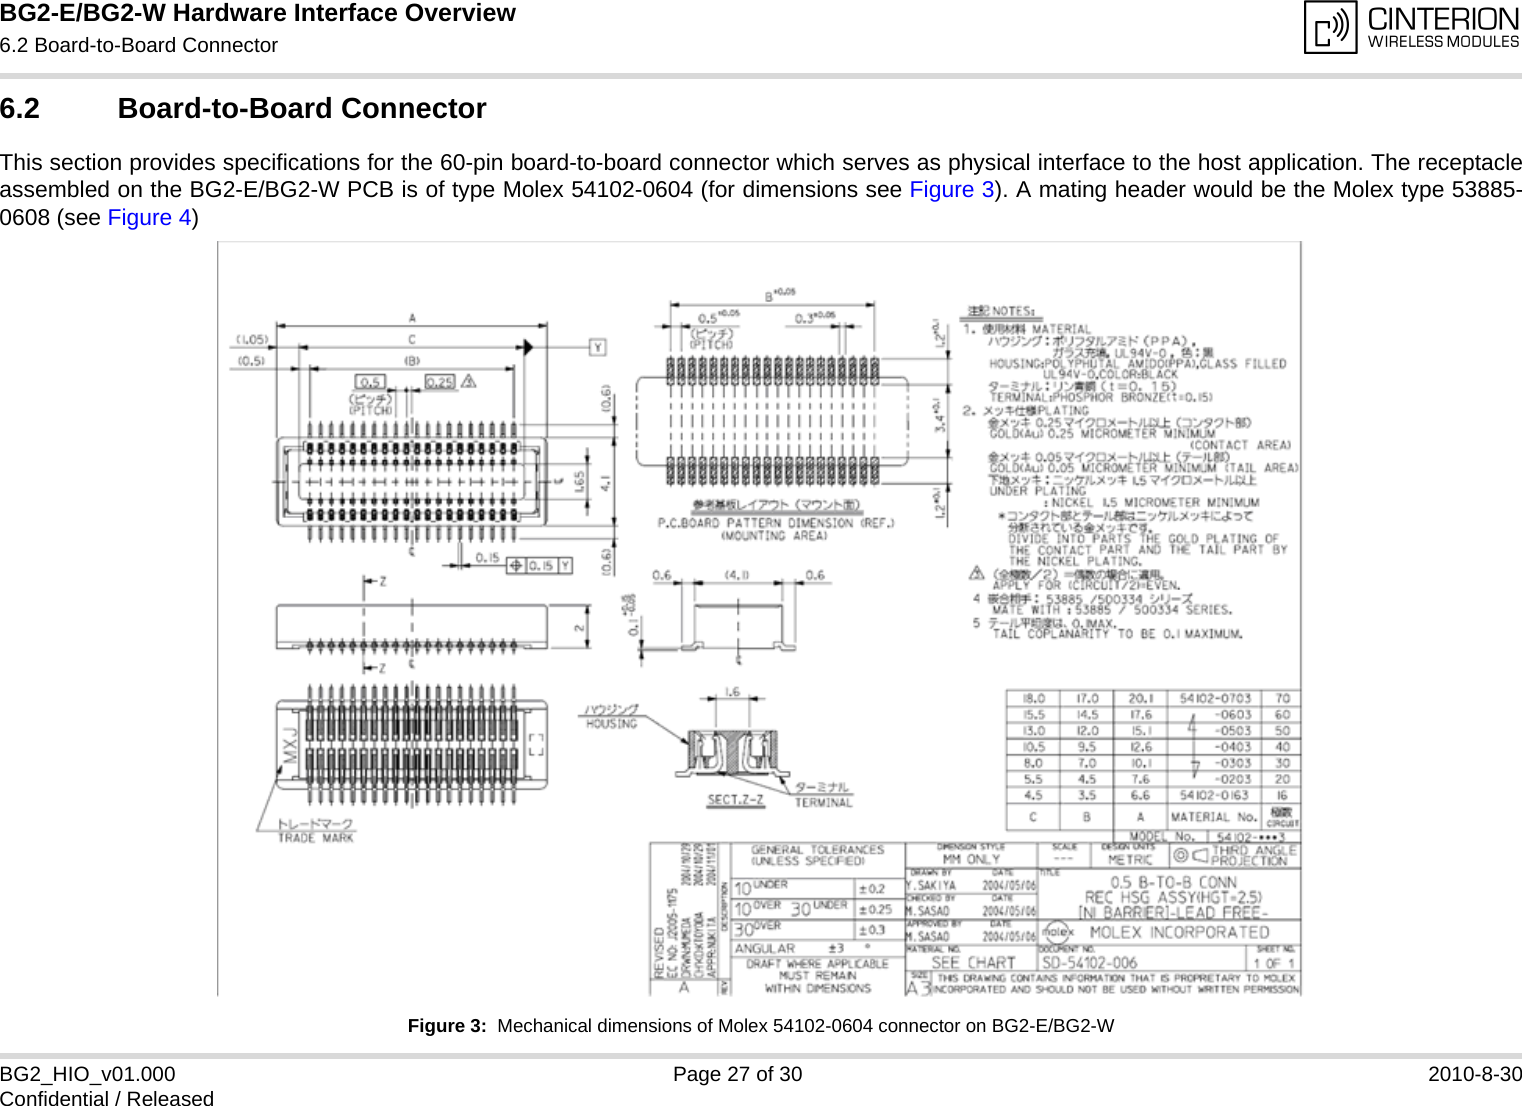 BG2-E/BG2-W Hardware Interface Overview6.2 Board-to-Board Connector28BG2_HIO_v01.000 Page 27 of 30 2010-8-30Confidential / Released6.2 Board-to-Board ConnectorThis section provides specifications for the 60-pin board-to-board connector which serves as physical interface to the host application. The receptacleassembled on the BG2-E/BG2-W PCB is of type Molex 54102-0604 (for dimensions see Figure 3). A mating header would be the Molex type 53885-0608 (see Figure 4) Figure 3:  Mechanical dimensions of Molex 54102-0604 connector on BG2-E/BG2-W